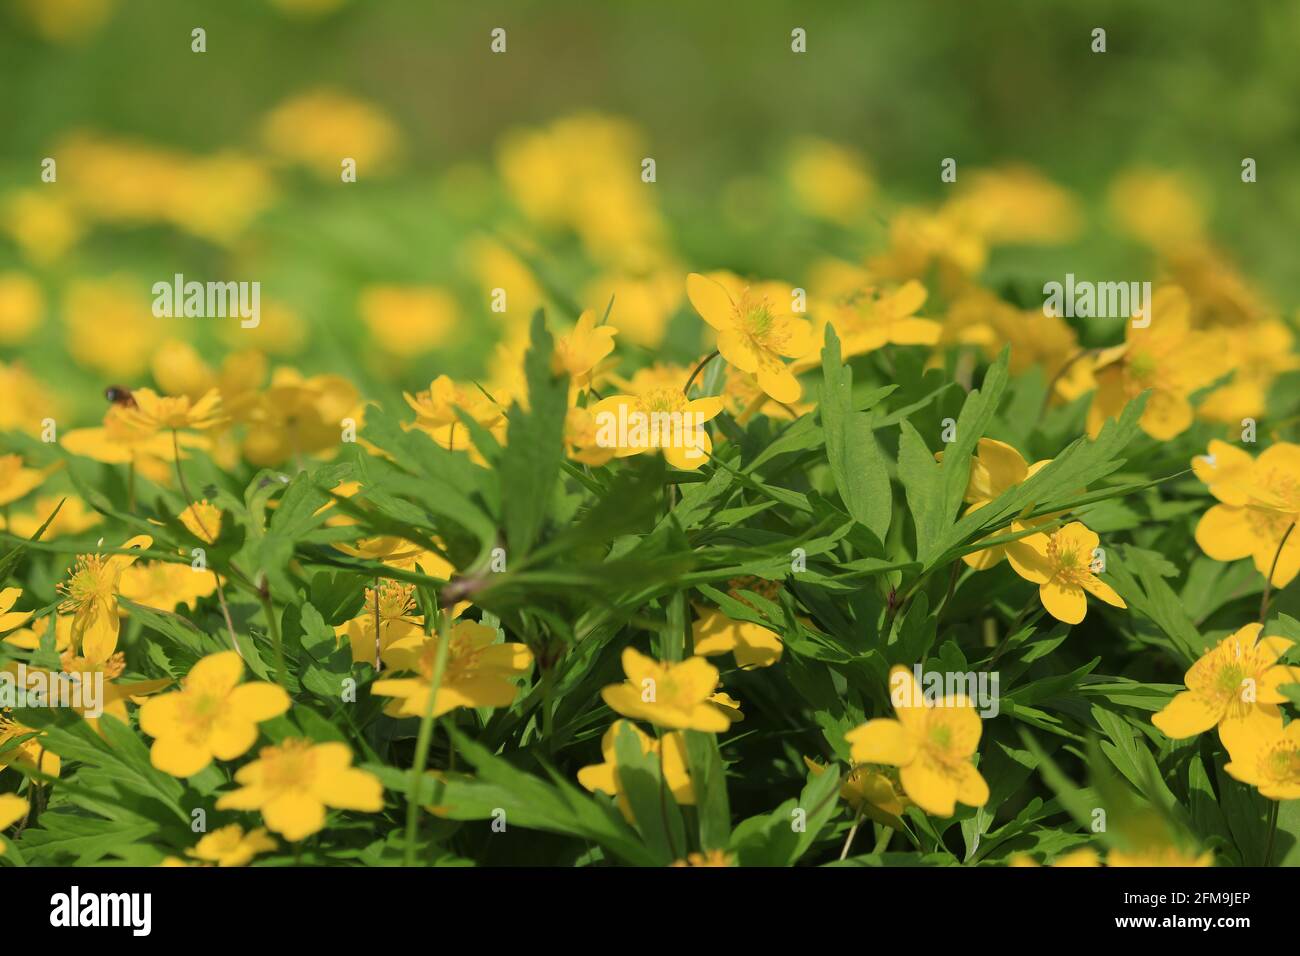 Yellow flowers background. Anemonoides ranunculoides, Yellow Anemone, Yellow Wood Anemone. Carpet of yellow flowers on a green meadow in the spring. Stock Photo